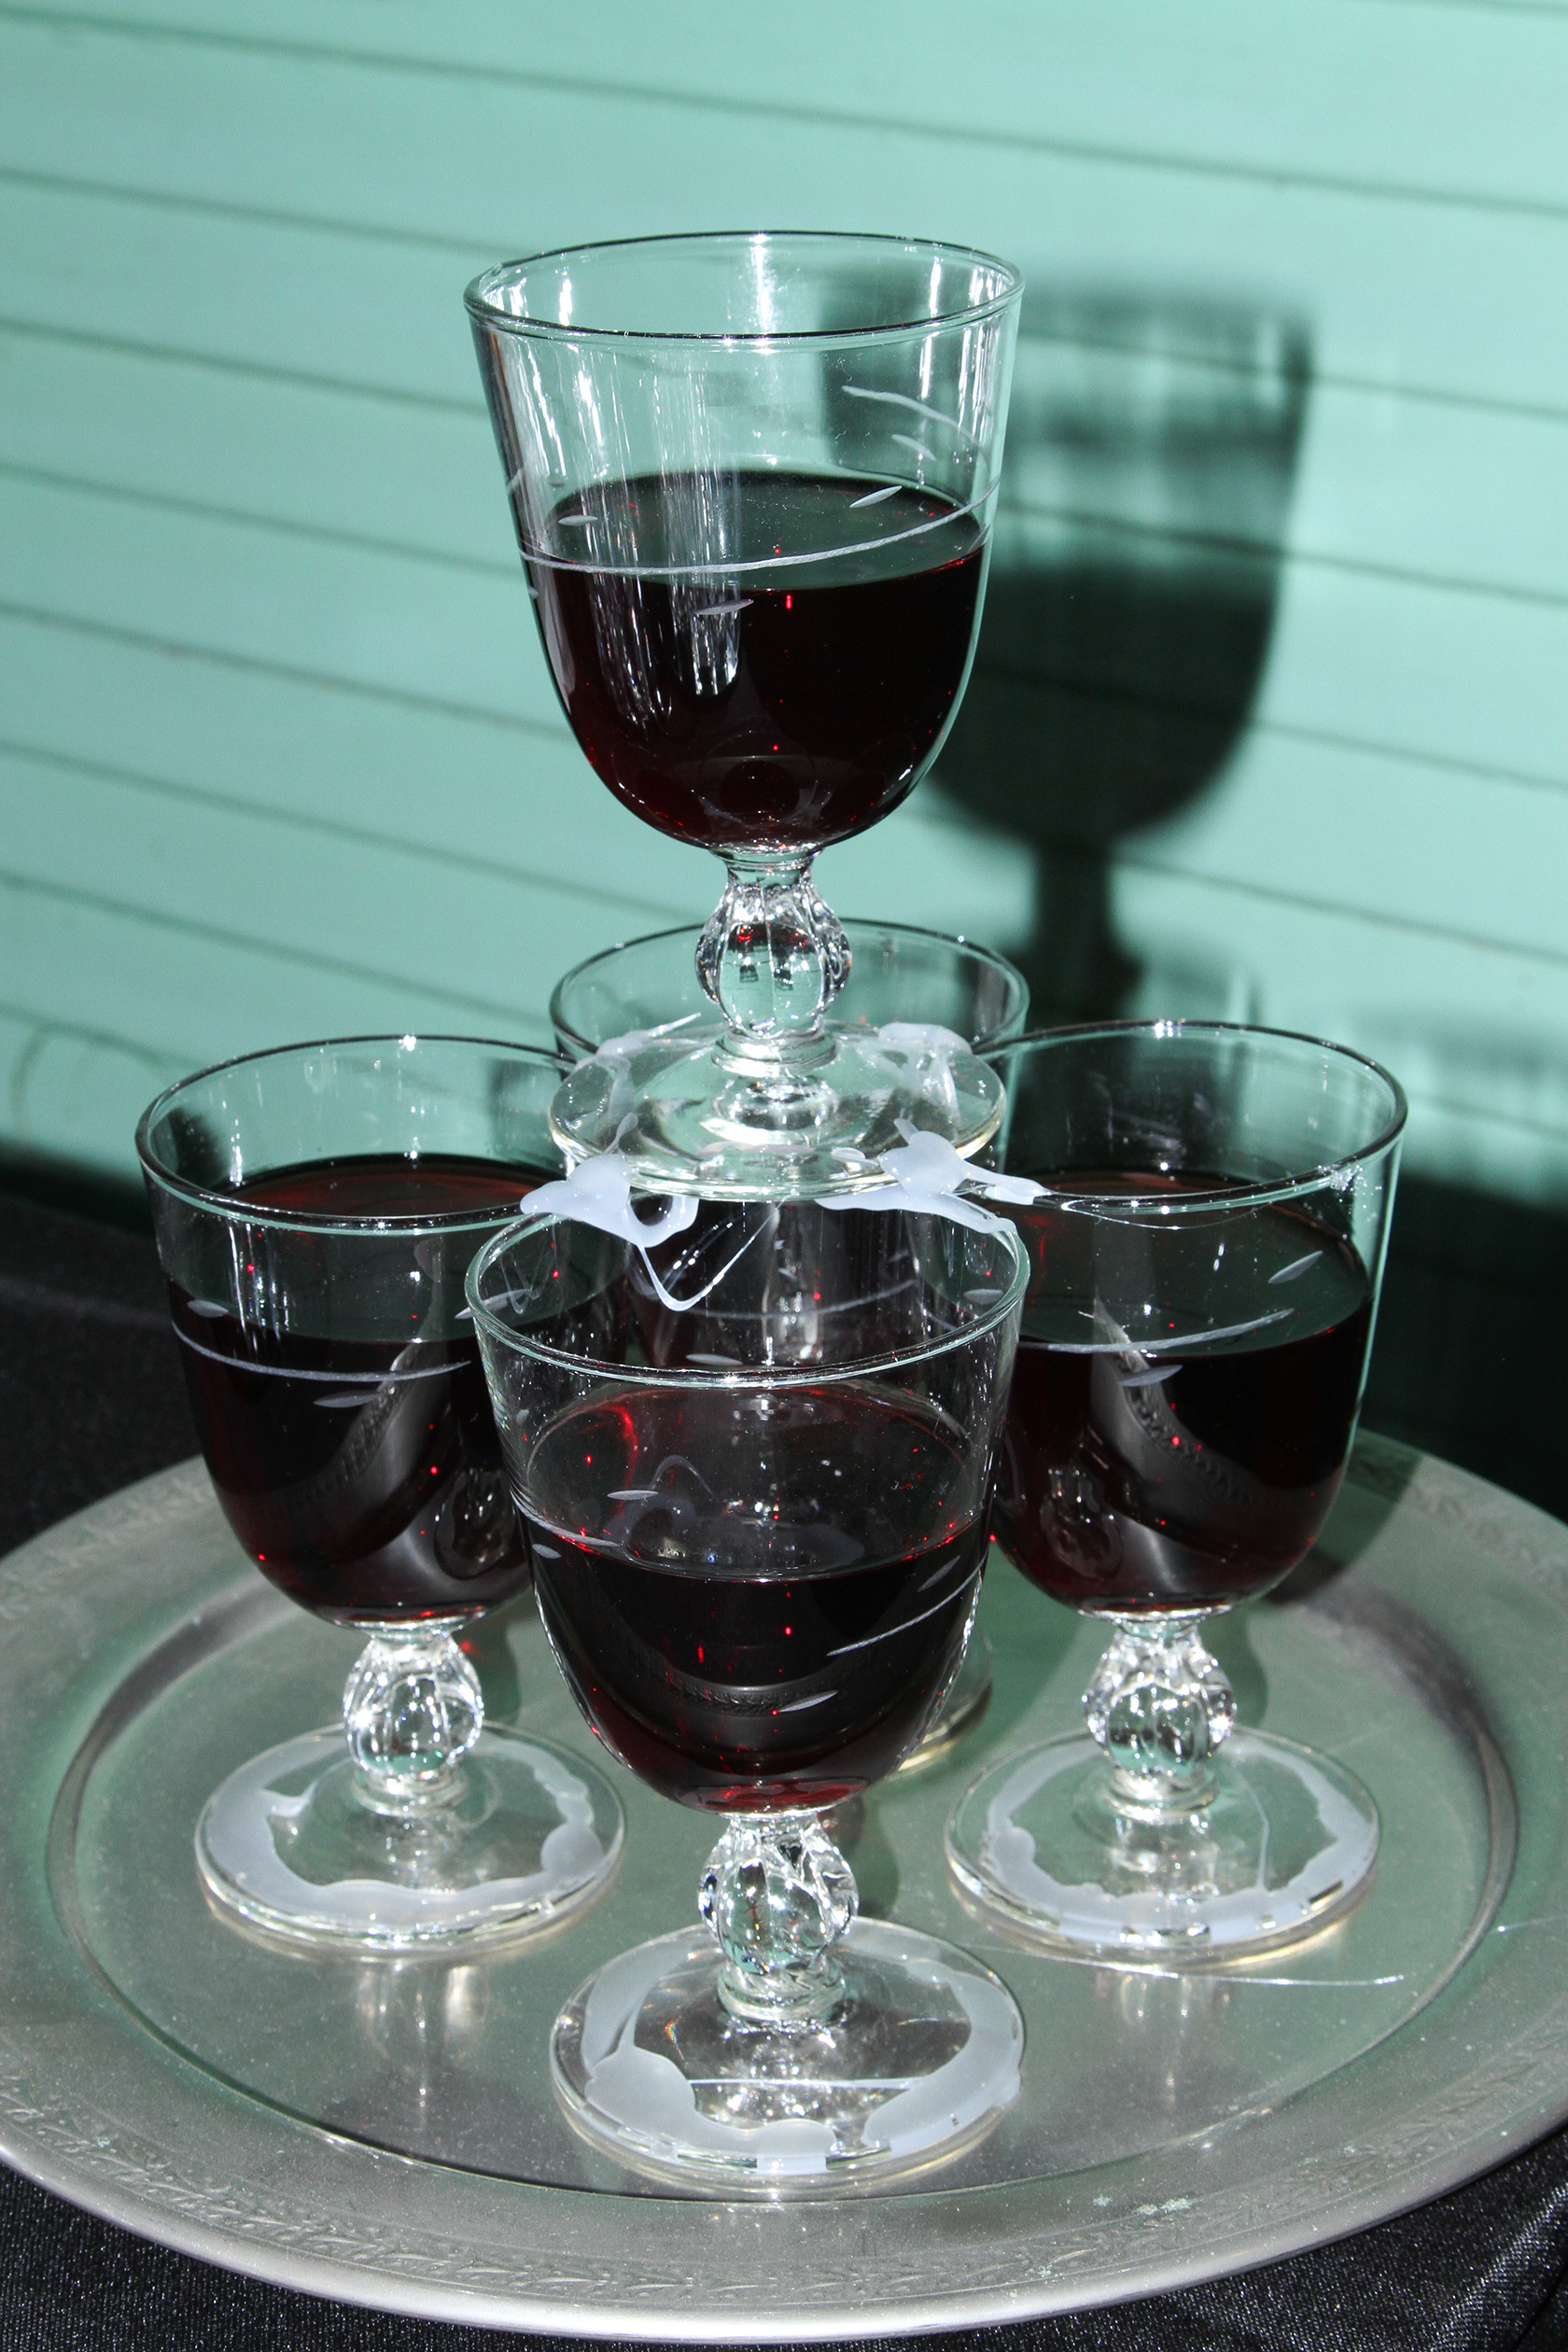 Tower of red wine glasses on a silver tray